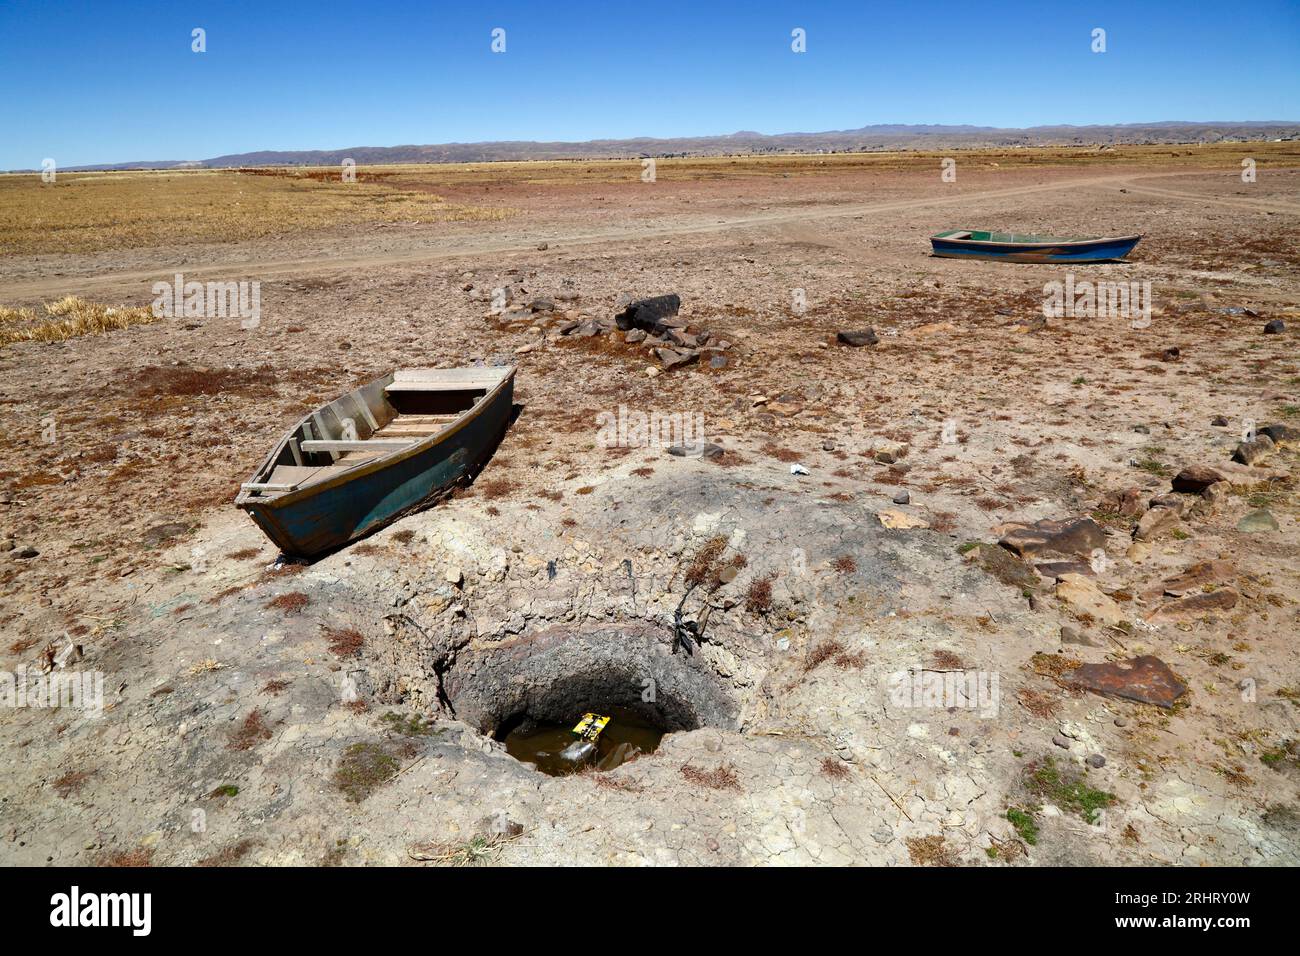 Lake Titicaca, BOLIVIA; August 18th 2023: Wooden rowing boats next to a well dug by villagers on the dried up shore of Cohana Bay on the Inner Lake / Huiñay Marka (the smaller part of Lake Titicaca) near the village of Cohana. Water levels in Lake Titicaca are approaching the record low level set in 1996, the lowest since Bolivia's weather service (Senhami) started keeping records in 1974. Many are blaming climate change; the last few years have been drier than normal and El Niño is currently strengthening in the Pacific Ocean off South America. Stock Photo